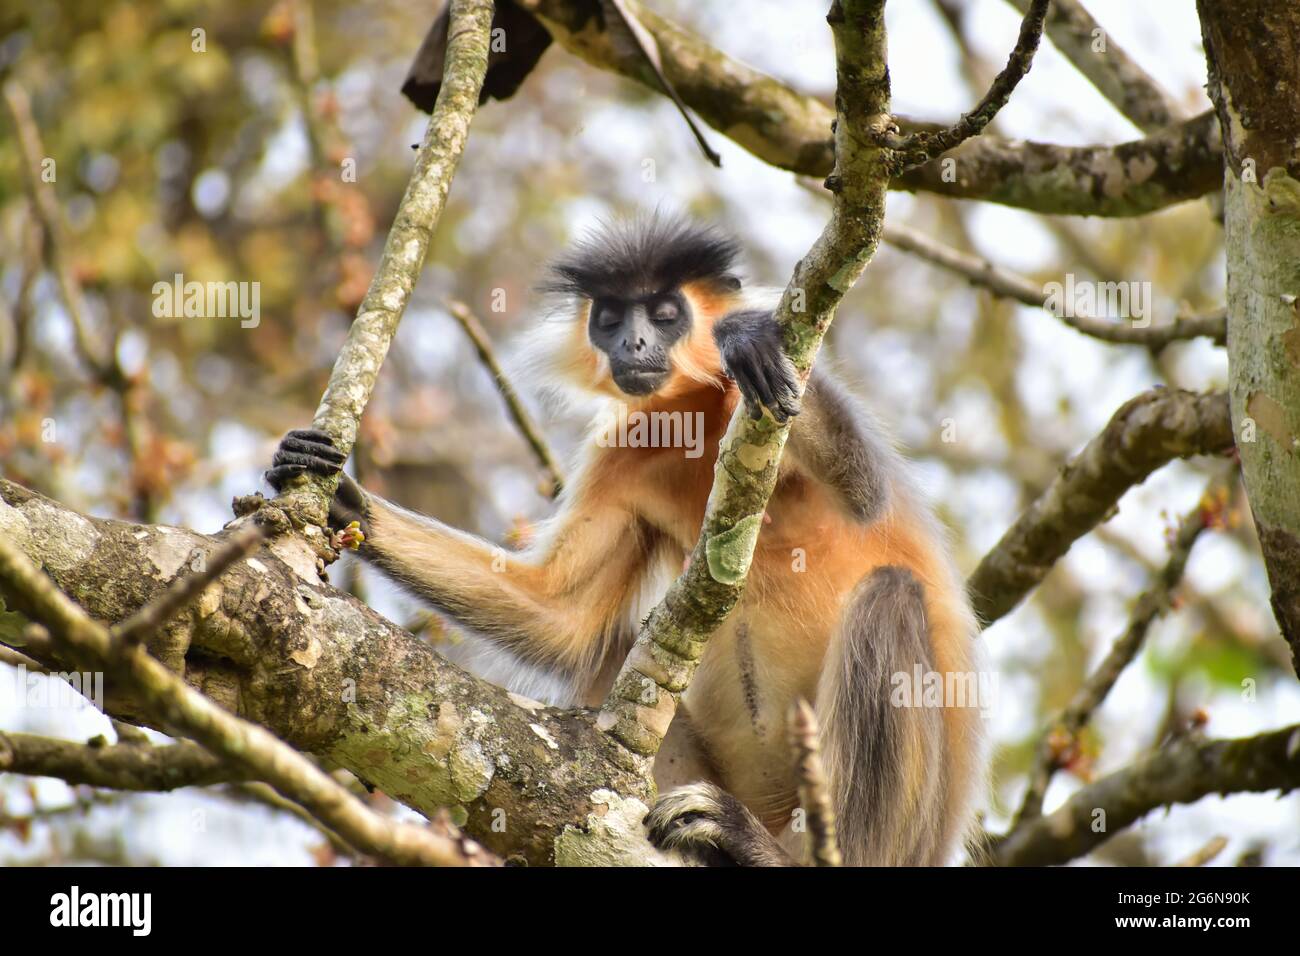 Golden langur is waiting on a tree golden langur is a type of special species of Monkey found in Asia. Stock Photo